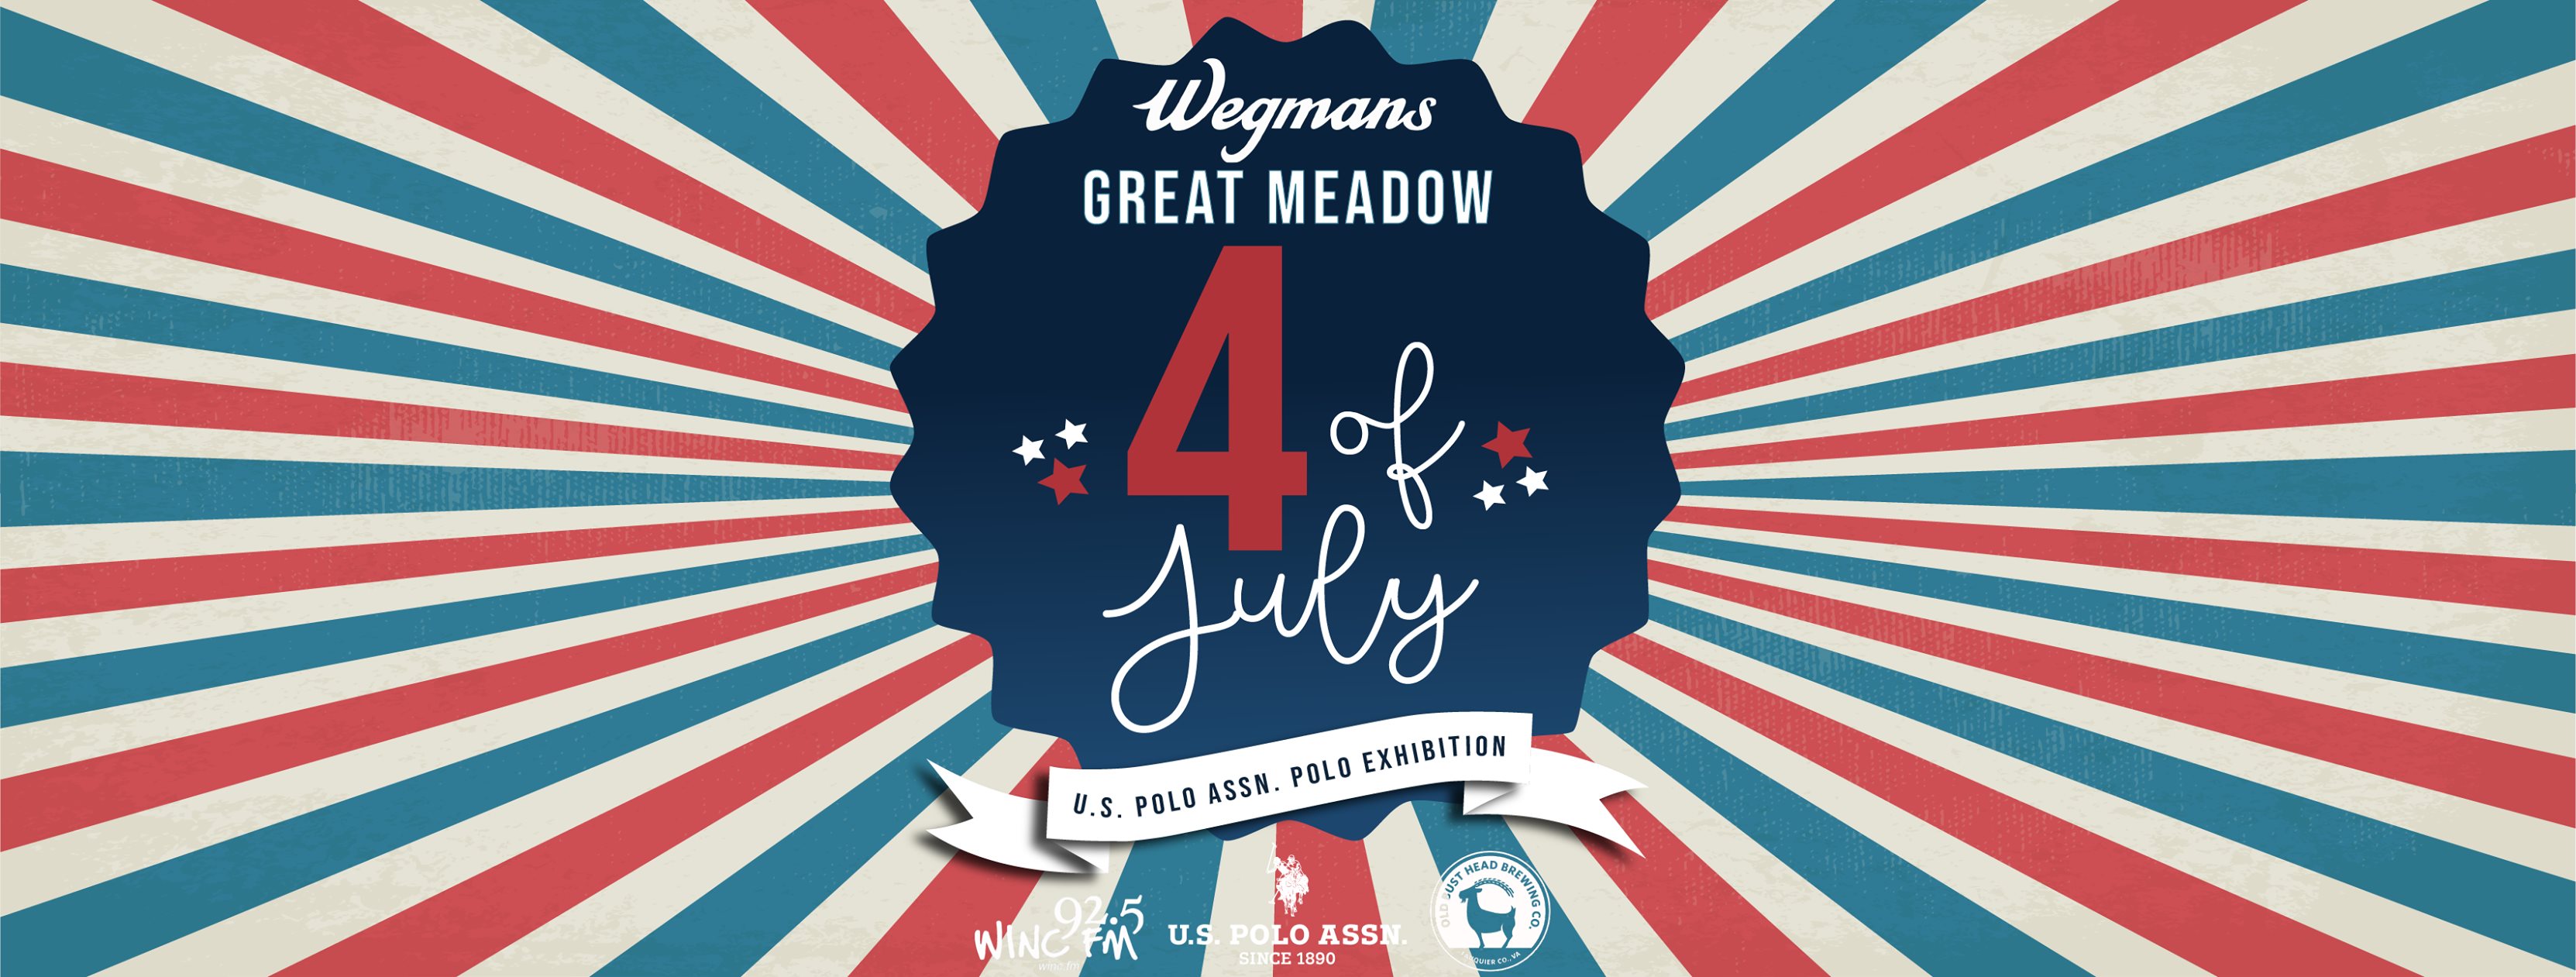 Wegmans Great Meadow 4th of July Celebration Middleburg Life